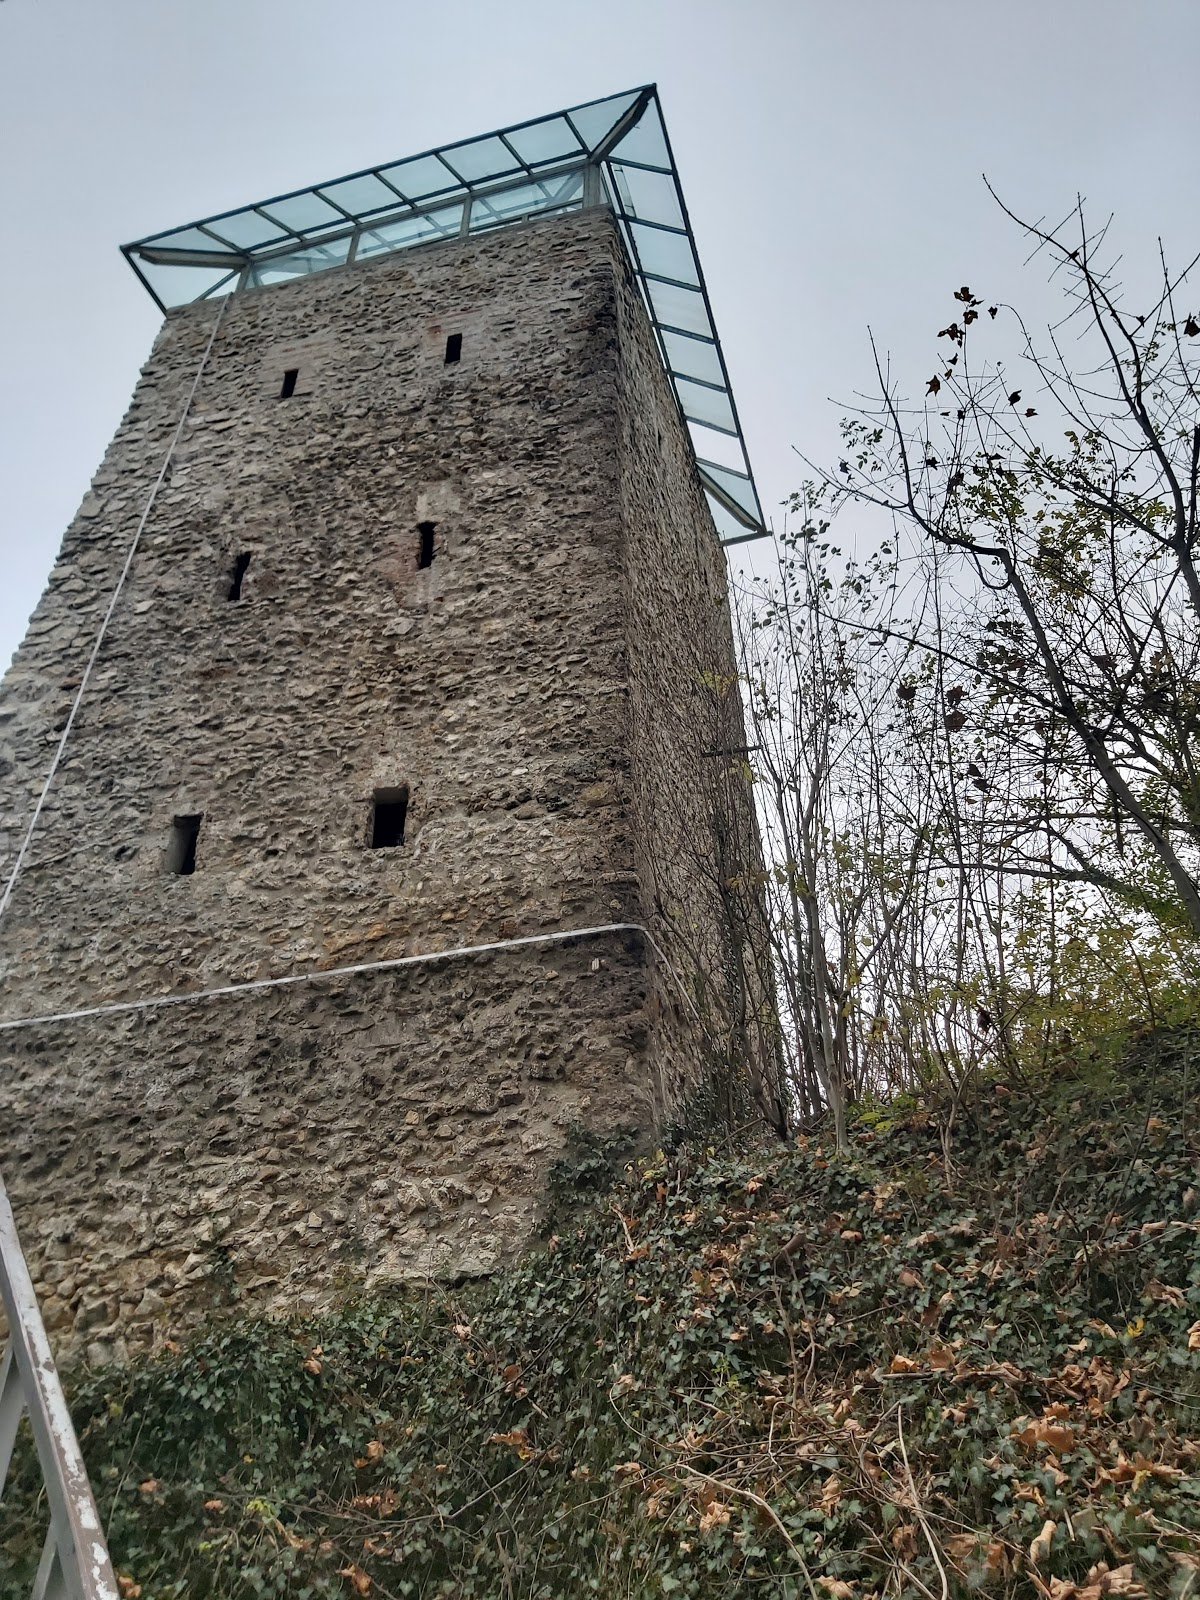 A picture of The Black Tower